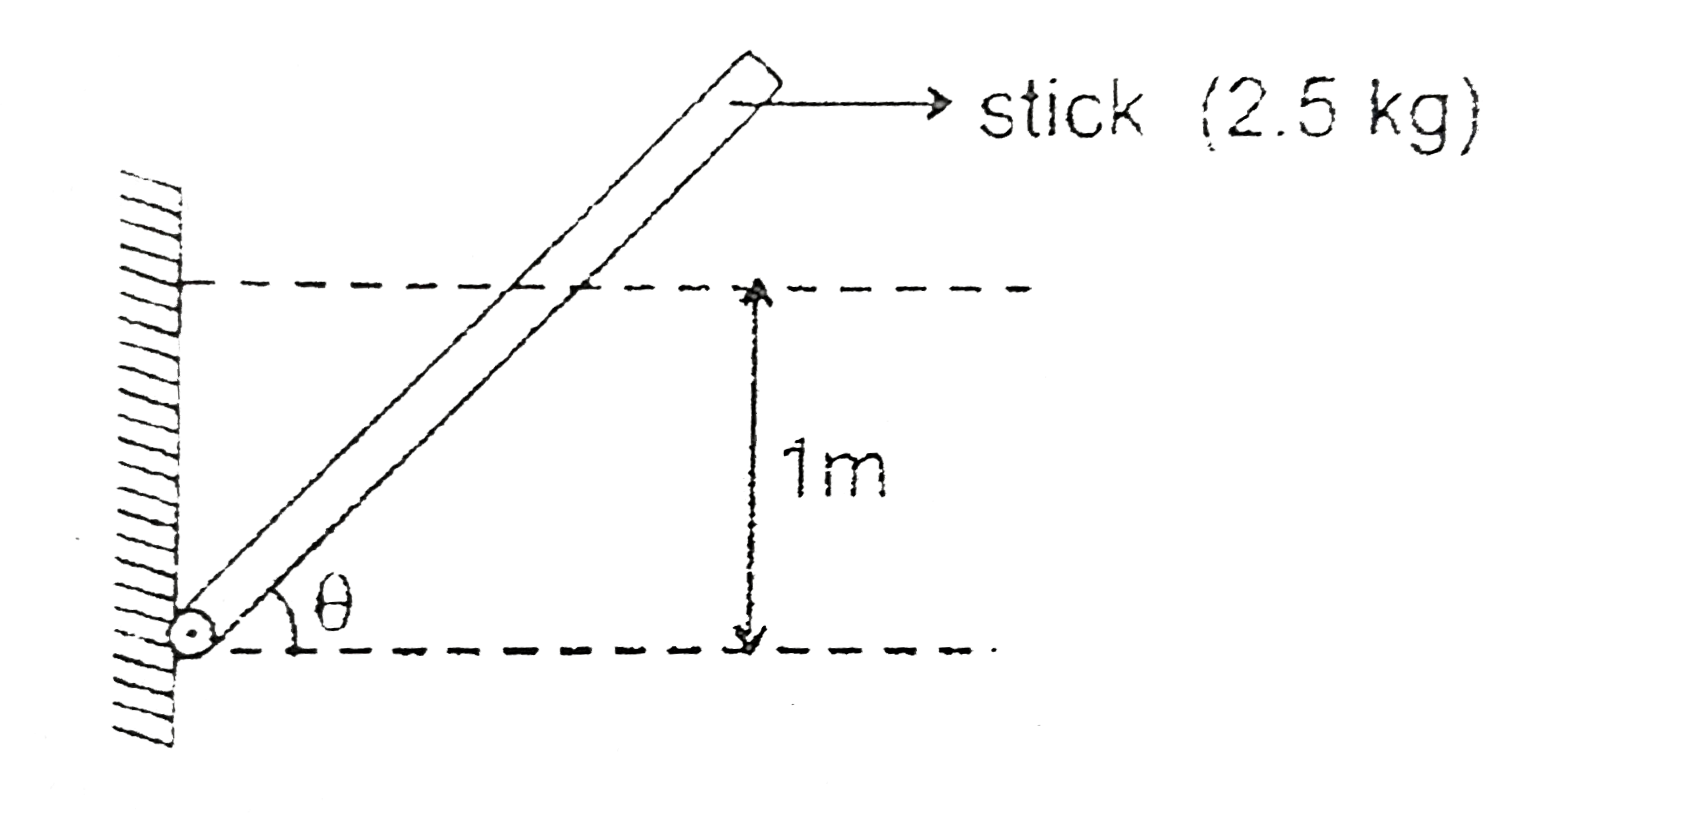 A stick of square cross-section (5 cm xx 5 cm) and length '4m' weighs 2.5 kg is in equilibrium as shown in the figure below. Datermine its angle of inclination (in degree) in equilibrium when the water surface is 1 m above the hinge.